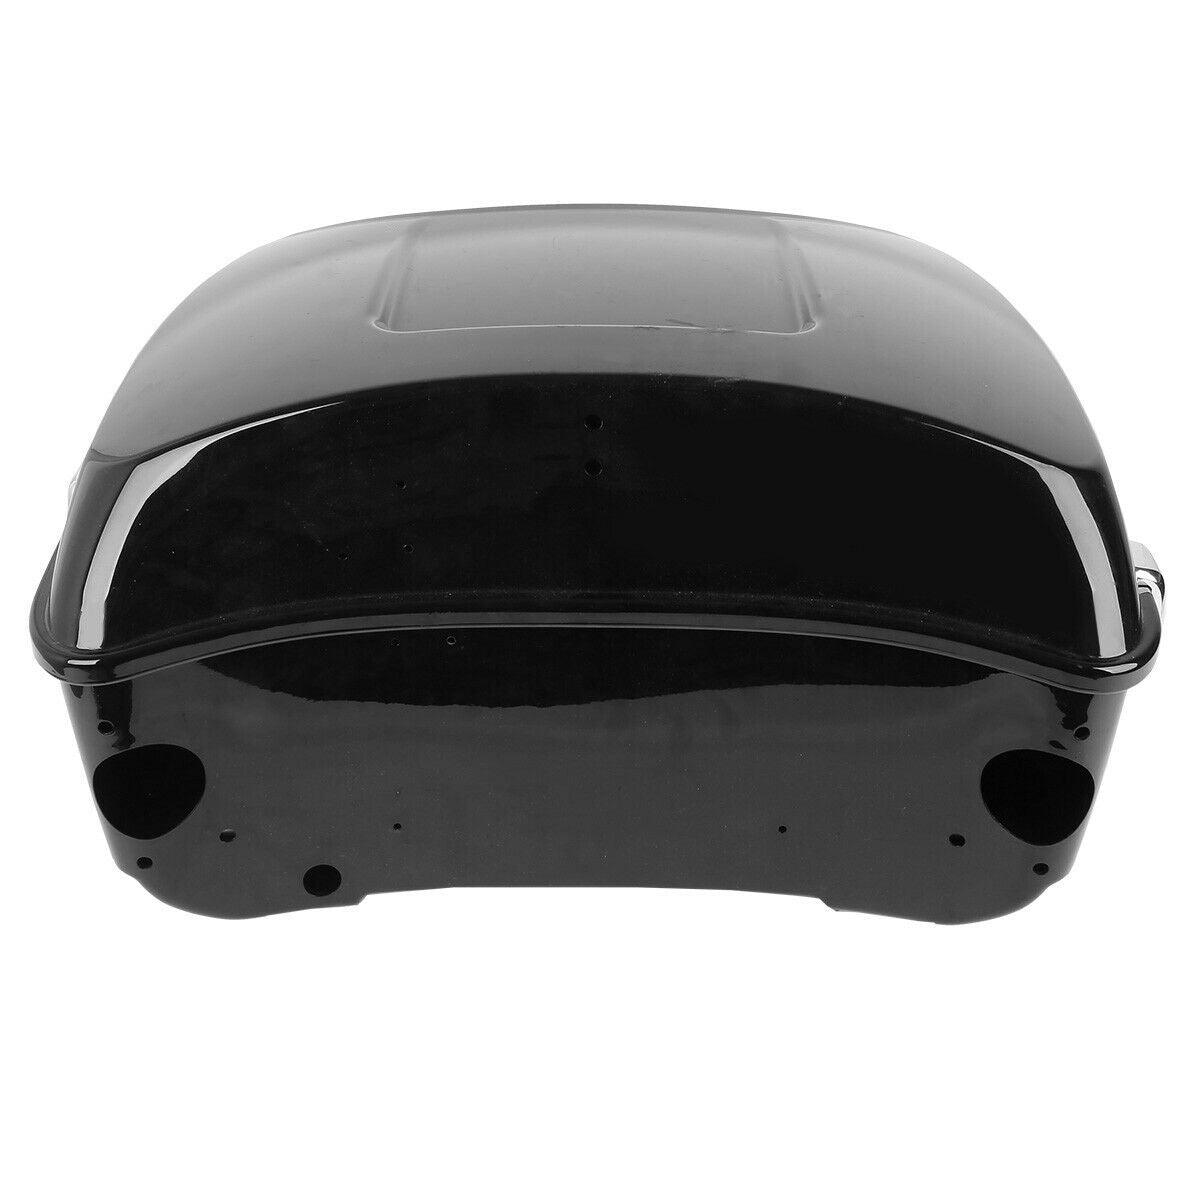 King Pack Trunk Two Up Rack Fit For Harley Tour Pak Touring Road Glide 2009-2013 - Moto Life Products